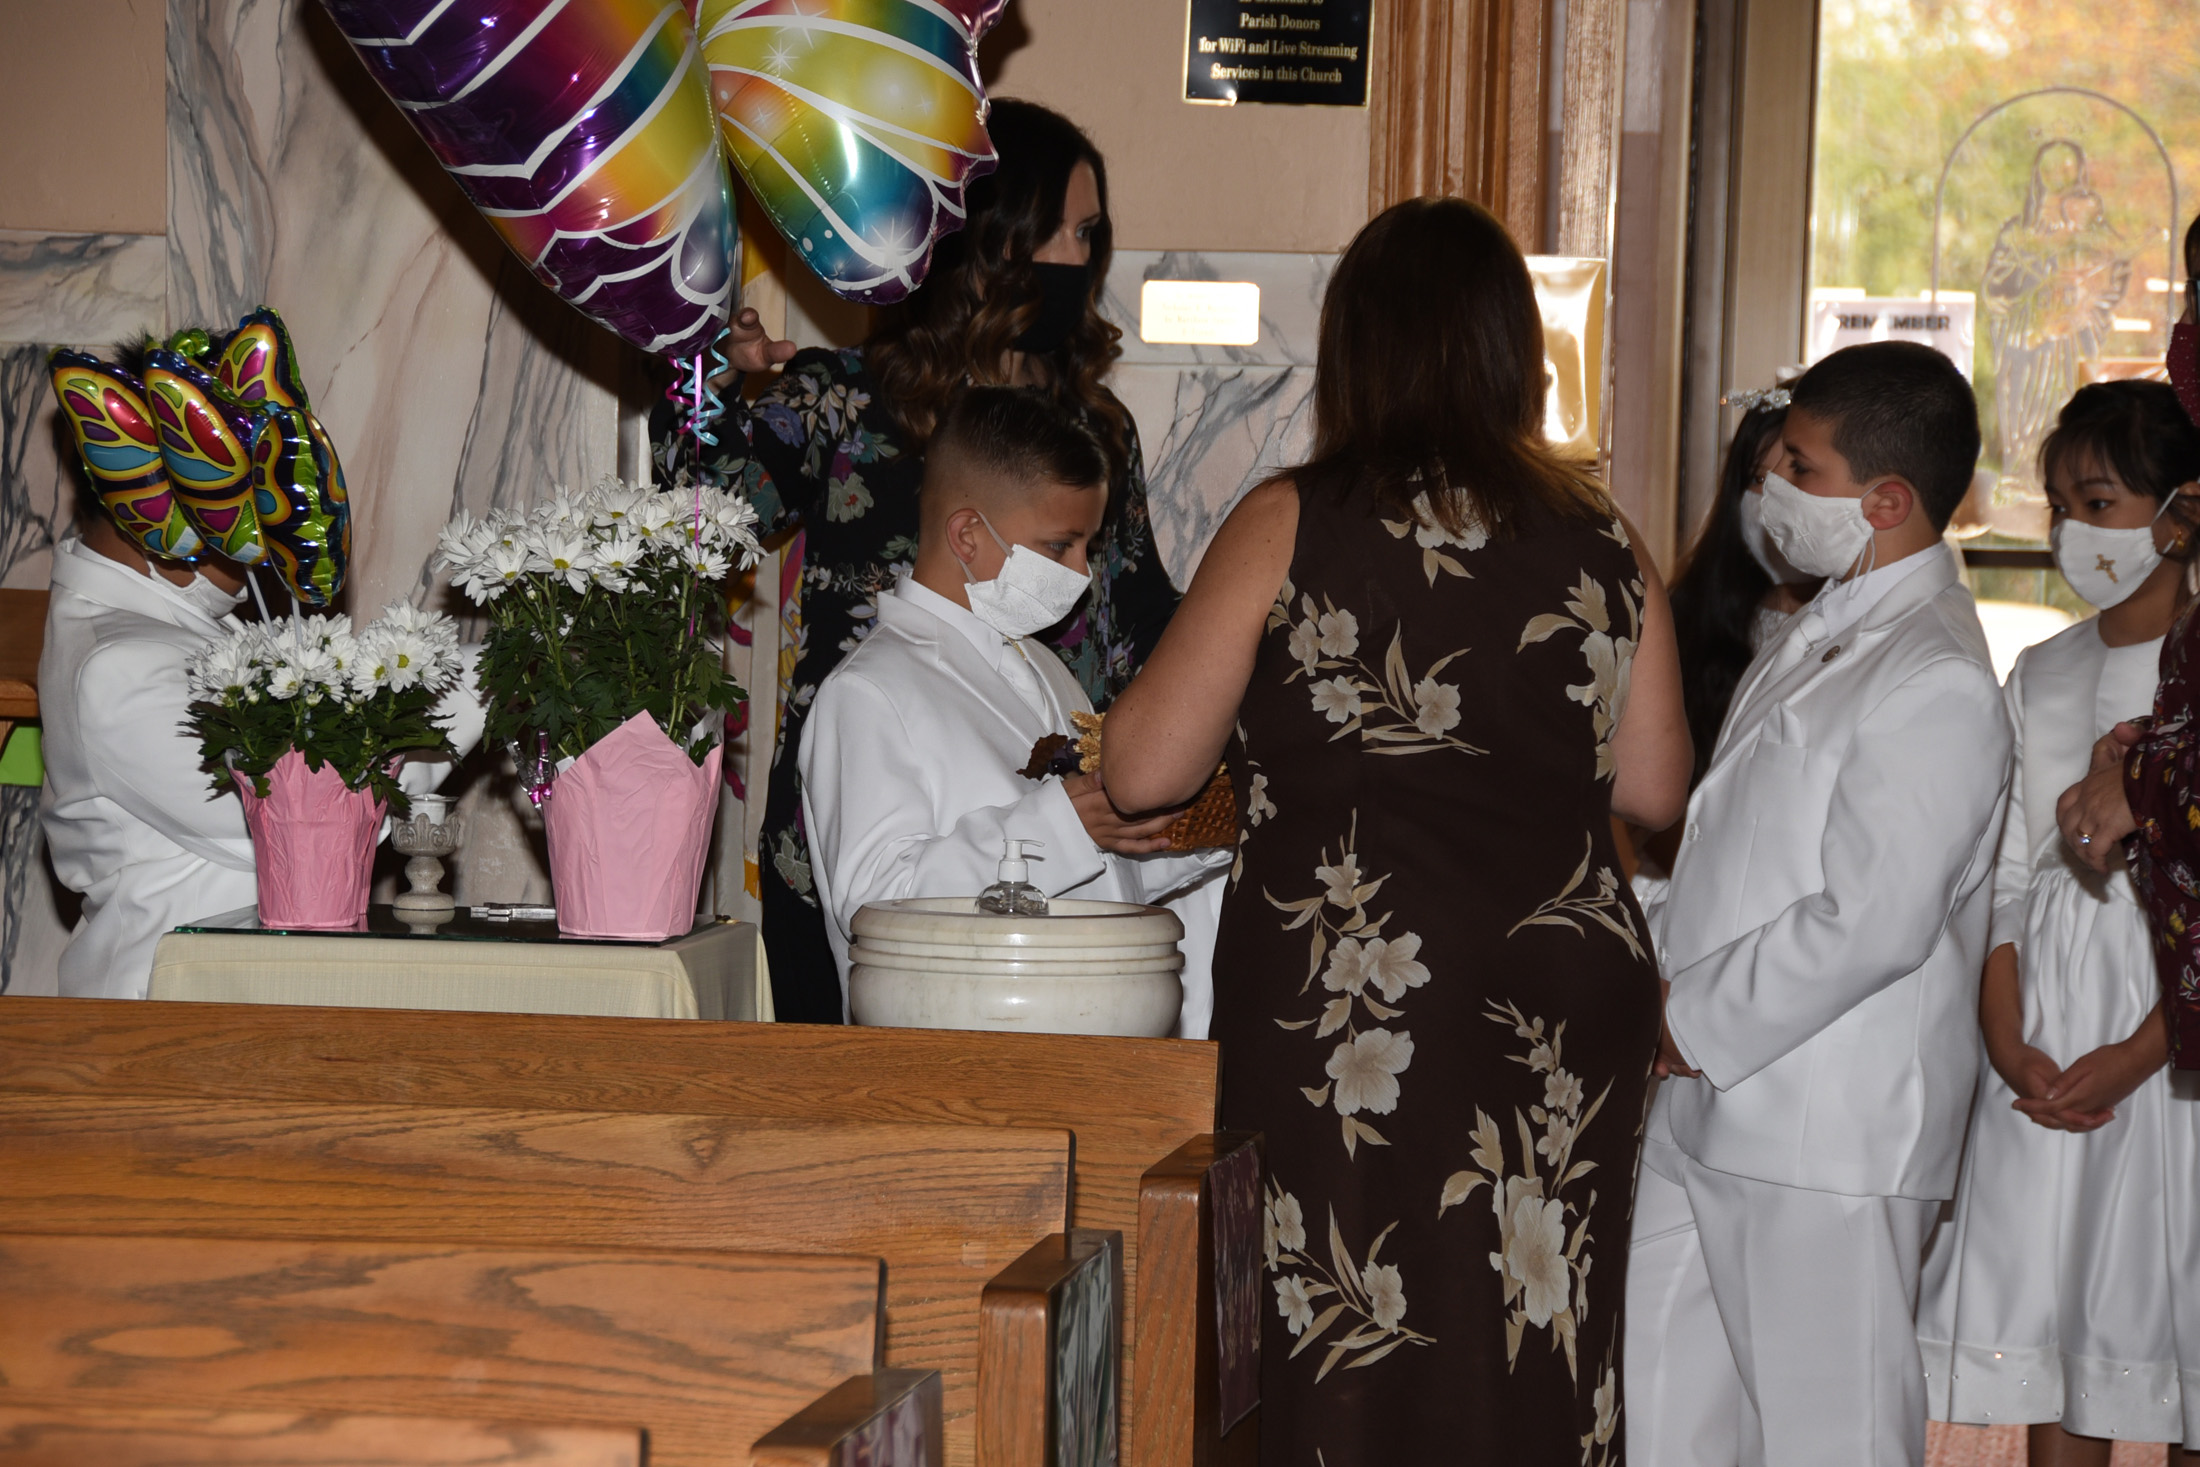 FIRST-COMMUNION-MAY-2-2021-1001001020